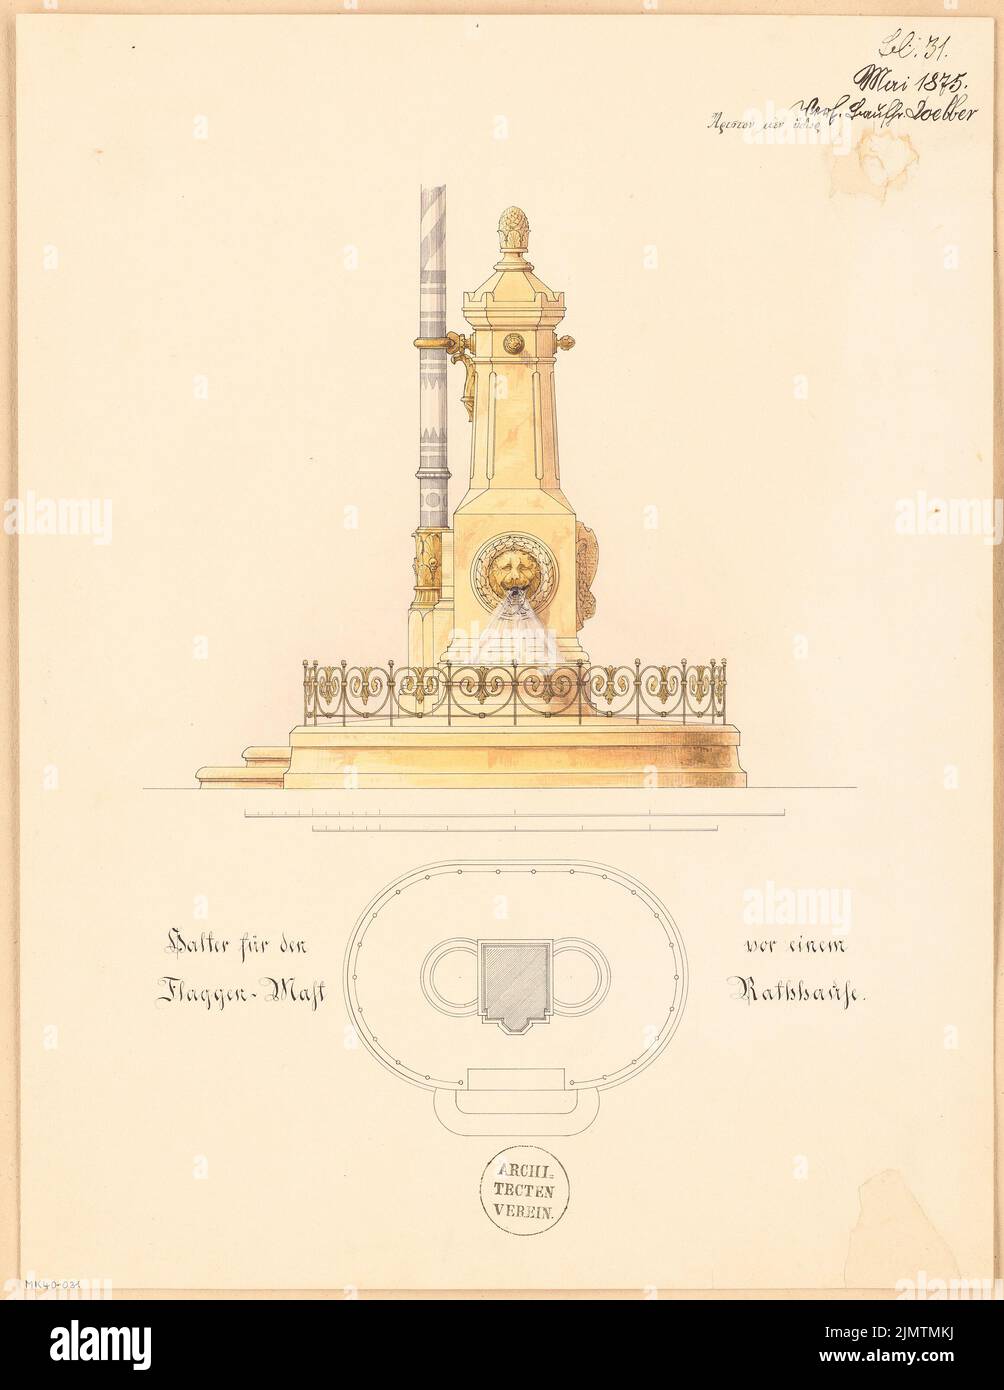 Doebber Adolf (1845-1920), holder for a flag mast. Monthly competition in May 1875 (05.1875): floor plan, upright side view; 2 scale strips. Tusche watercolor on the box, 47.6 x 36.8 cm (including scan edges) Doebber Adolf  (1845-1920): Halter für einen Flaggenmast. Monatskonkurrenz Mai 1875 Stock Photo